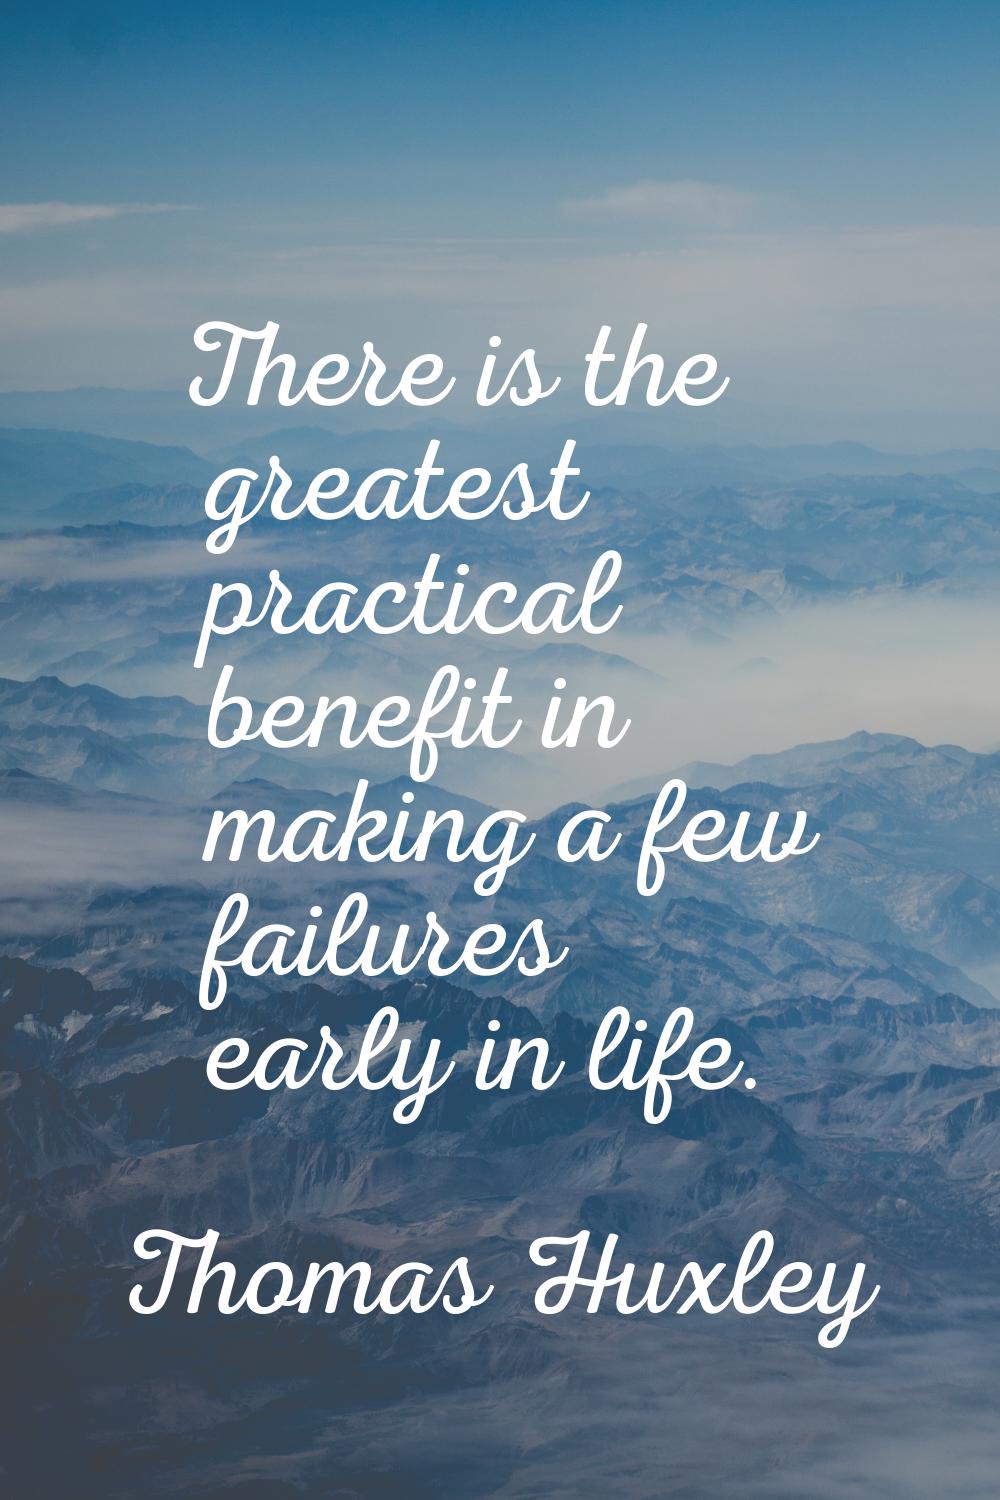 There is the greatest practical benefit in making a few failures early in life.